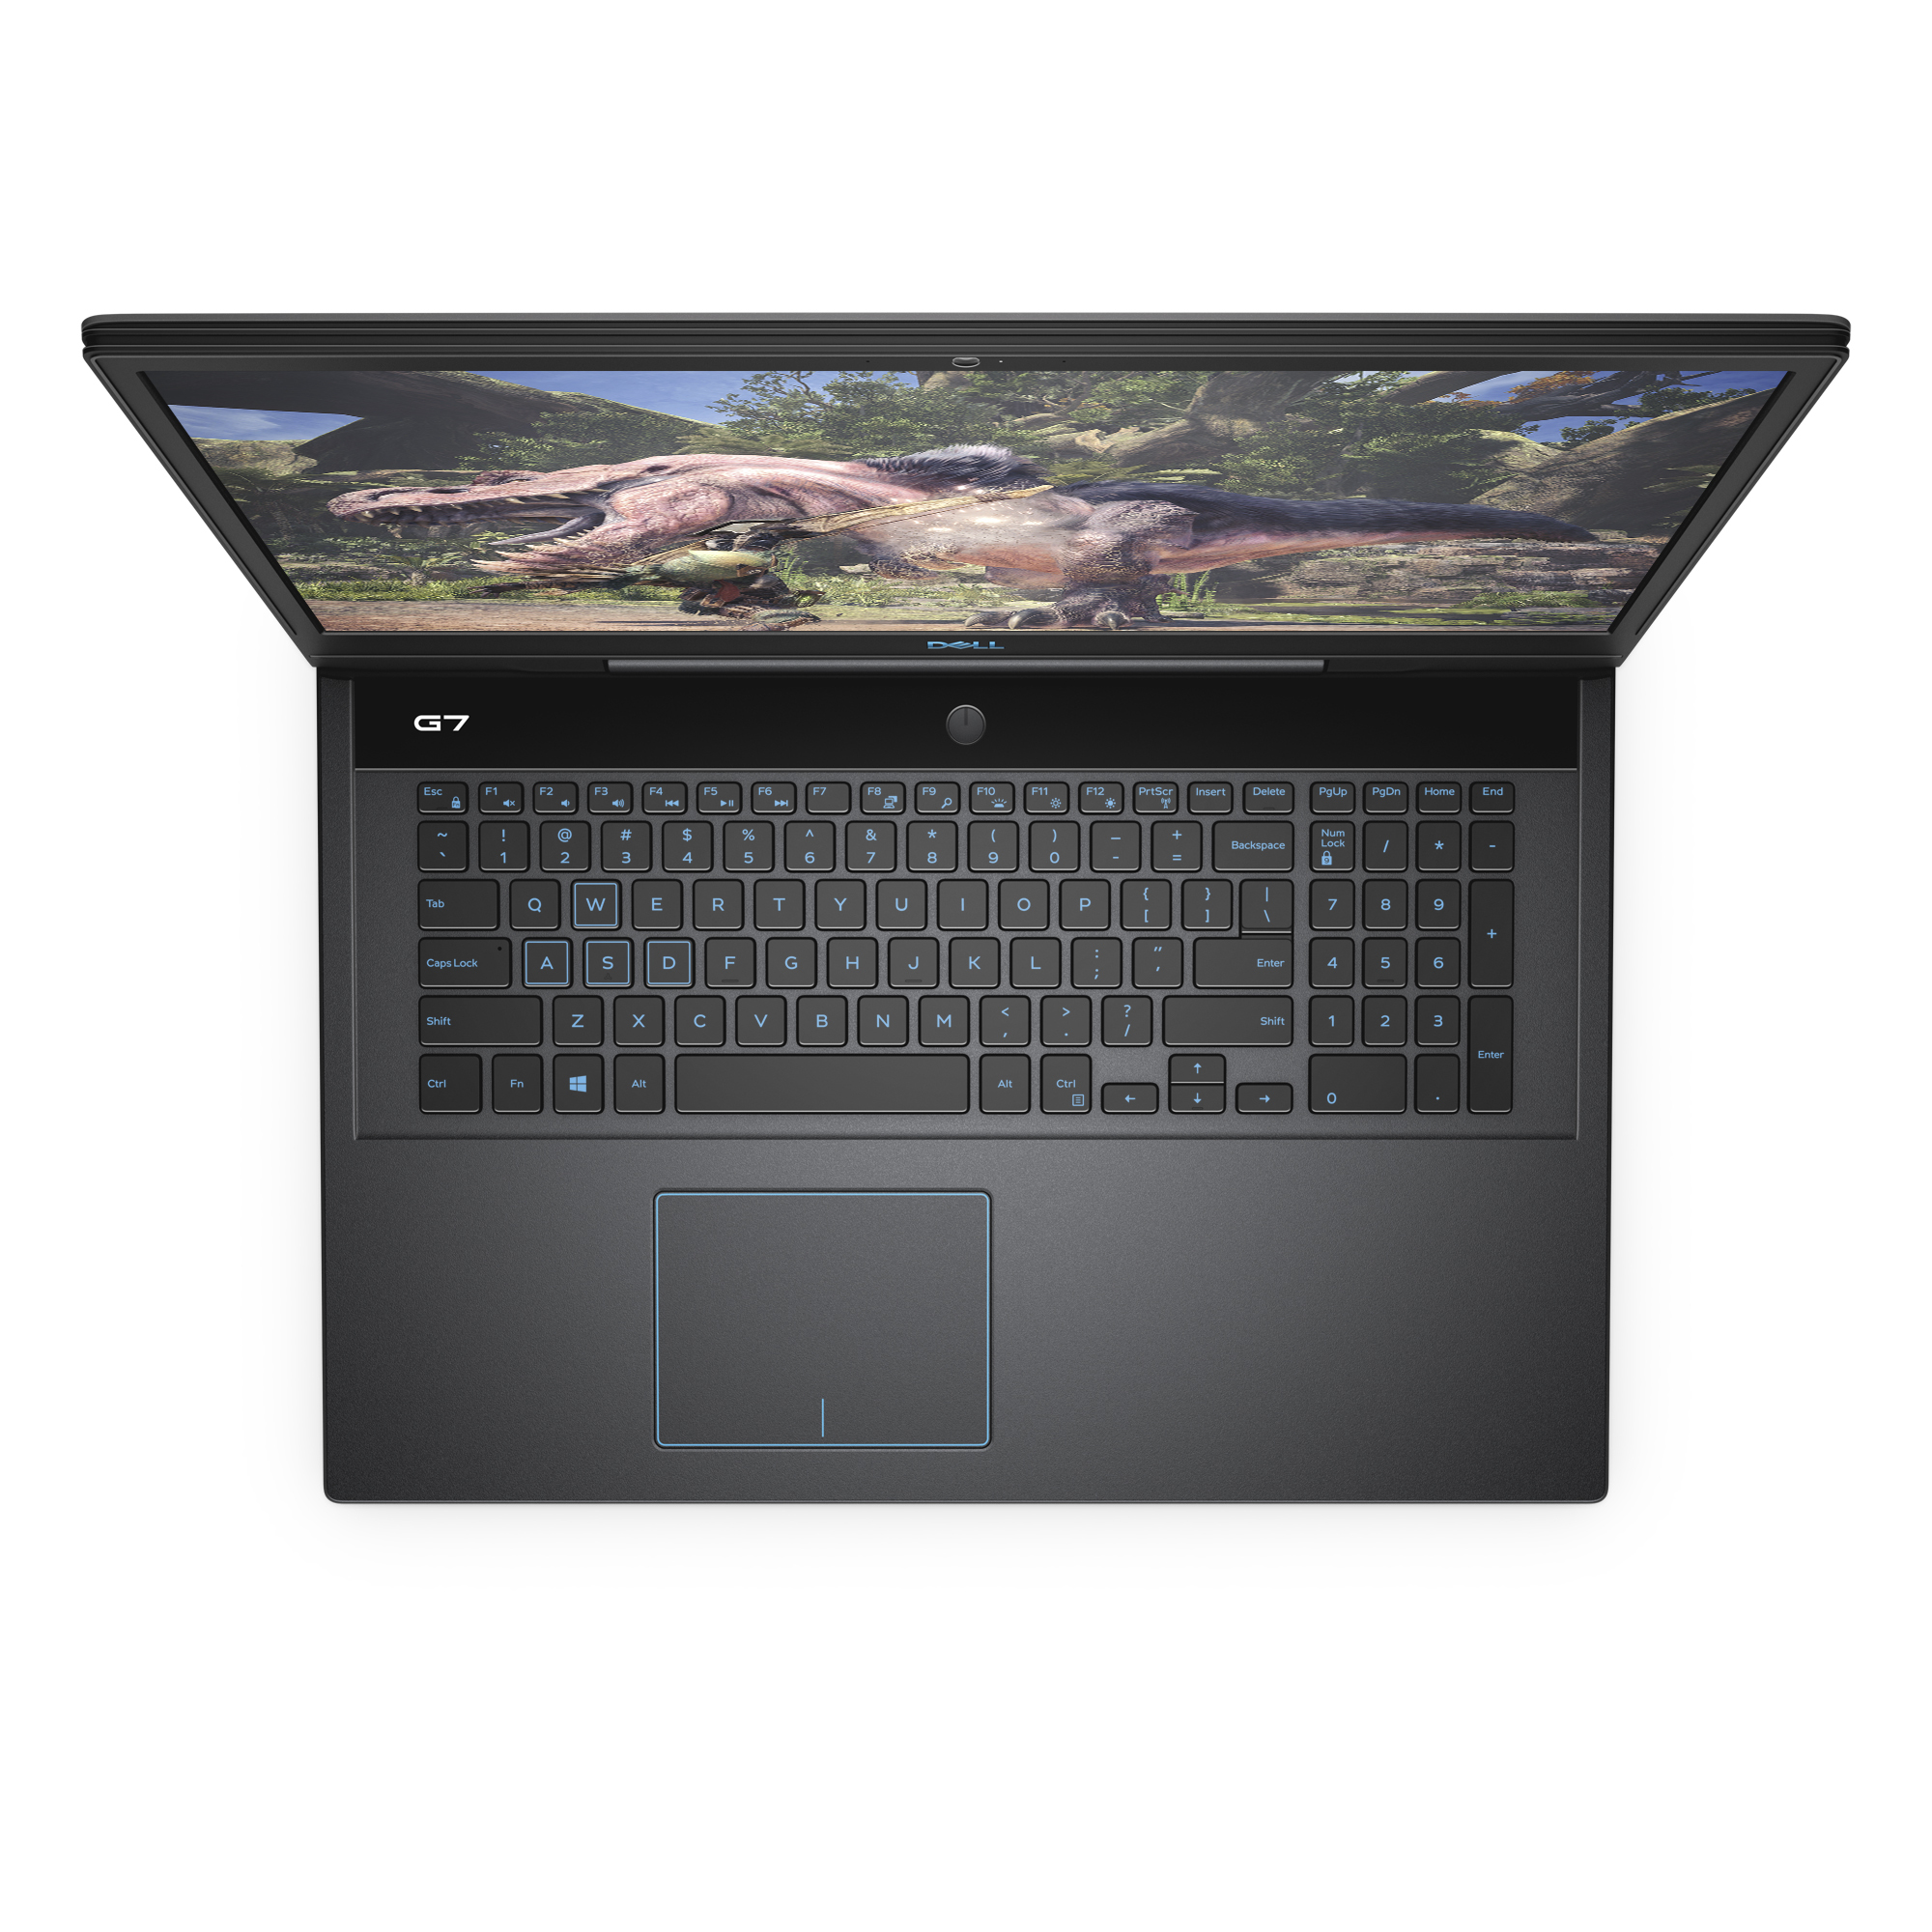 Dell G7 17 7790 Gaming Laptop, 17.3'' FHD, Intel Core i5-9300H, NVIDIA GeForce RTX 2060, 8GB RAM, 128 GB SSD + 1TB HDD, Windows 10 Home, G7790-5695GRY-PUS (Google Classroom Compatible) - image 5 of 16